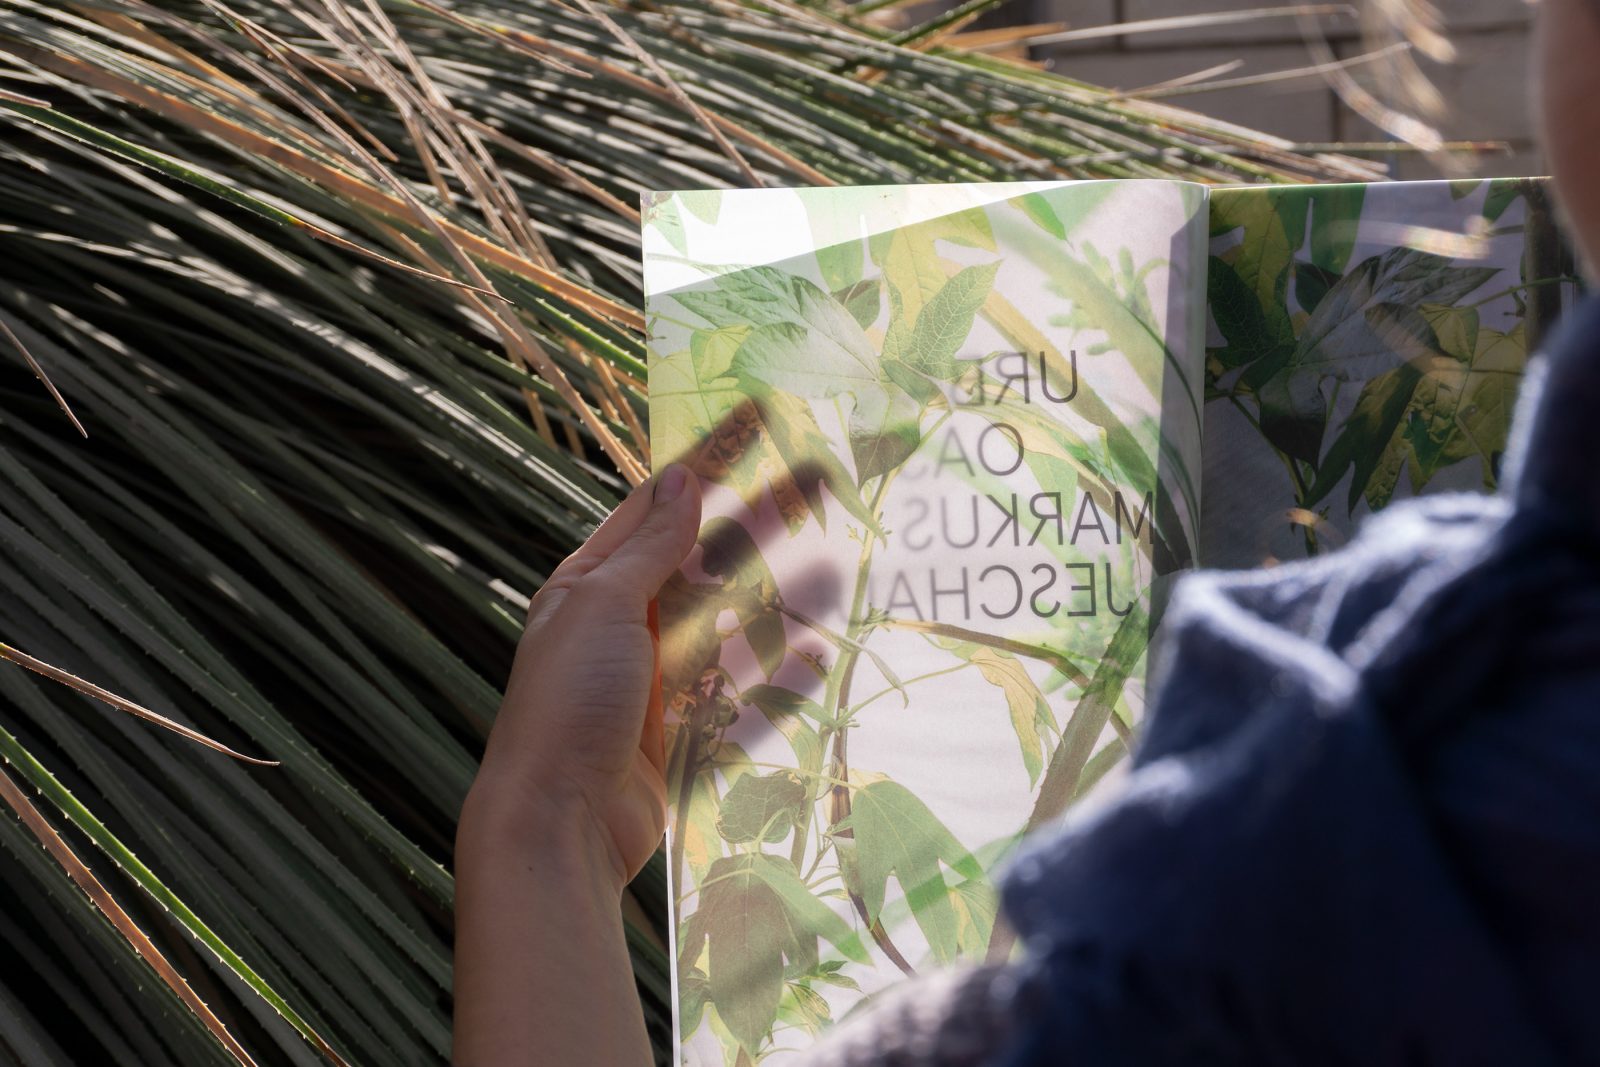 Urban Oasis Artist Book Follows the Character of the Urban No.8 Installation